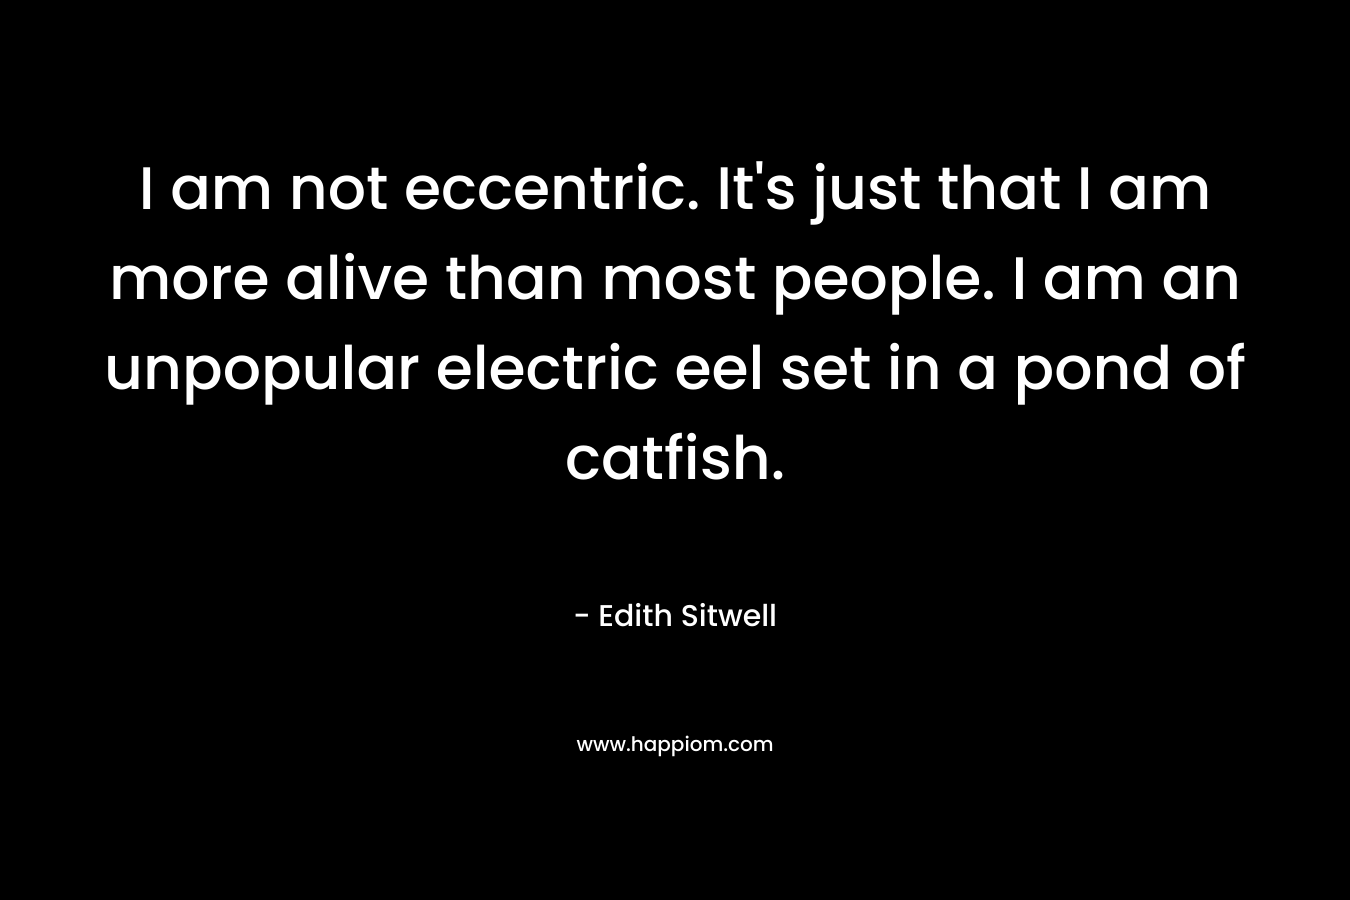 I am not eccentric. It’s just that I am more alive than most people. I am an unpopular electric eel set in a pond of catfish. – Edith Sitwell